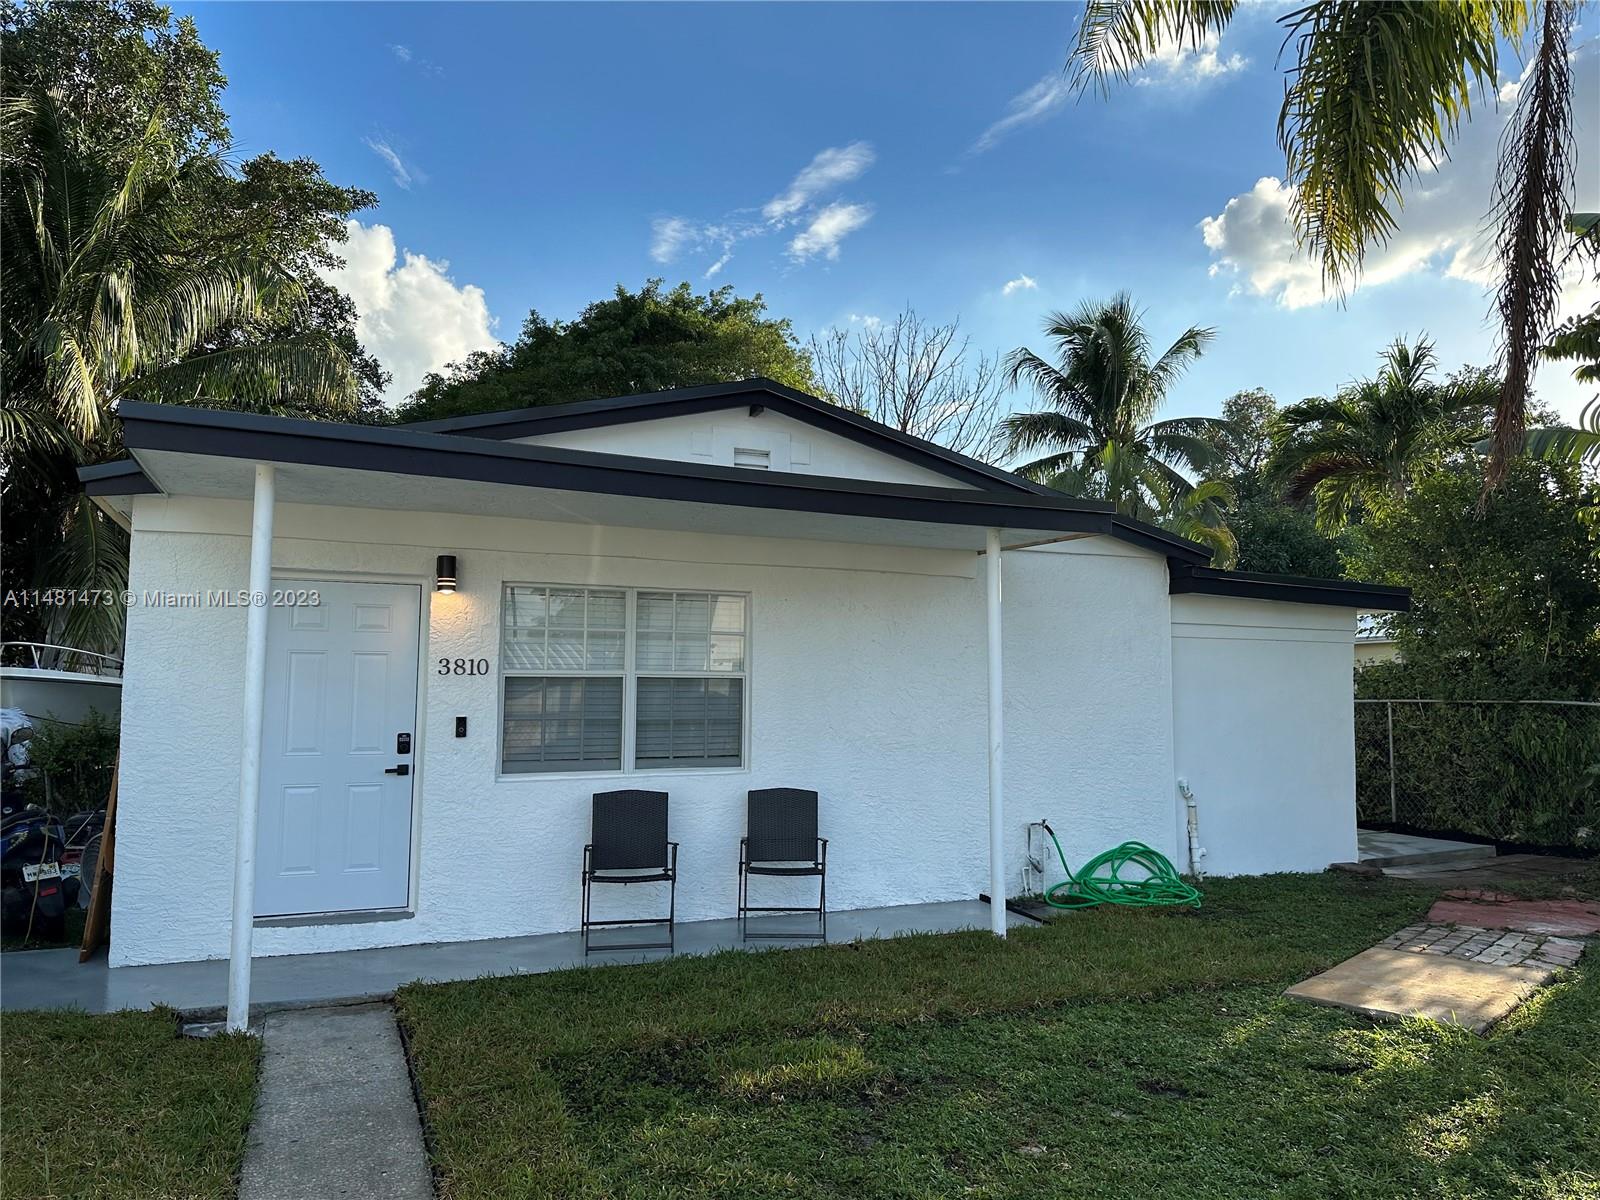 Beautiful and remodeled starters home with 2/2 centrally located close to I95. New roof, beautiful ceramic floors, new bathrooms and kitchen with top of the line counter tops. Huge backyard with plenty of space for pool, RV, boat or adding another structure.